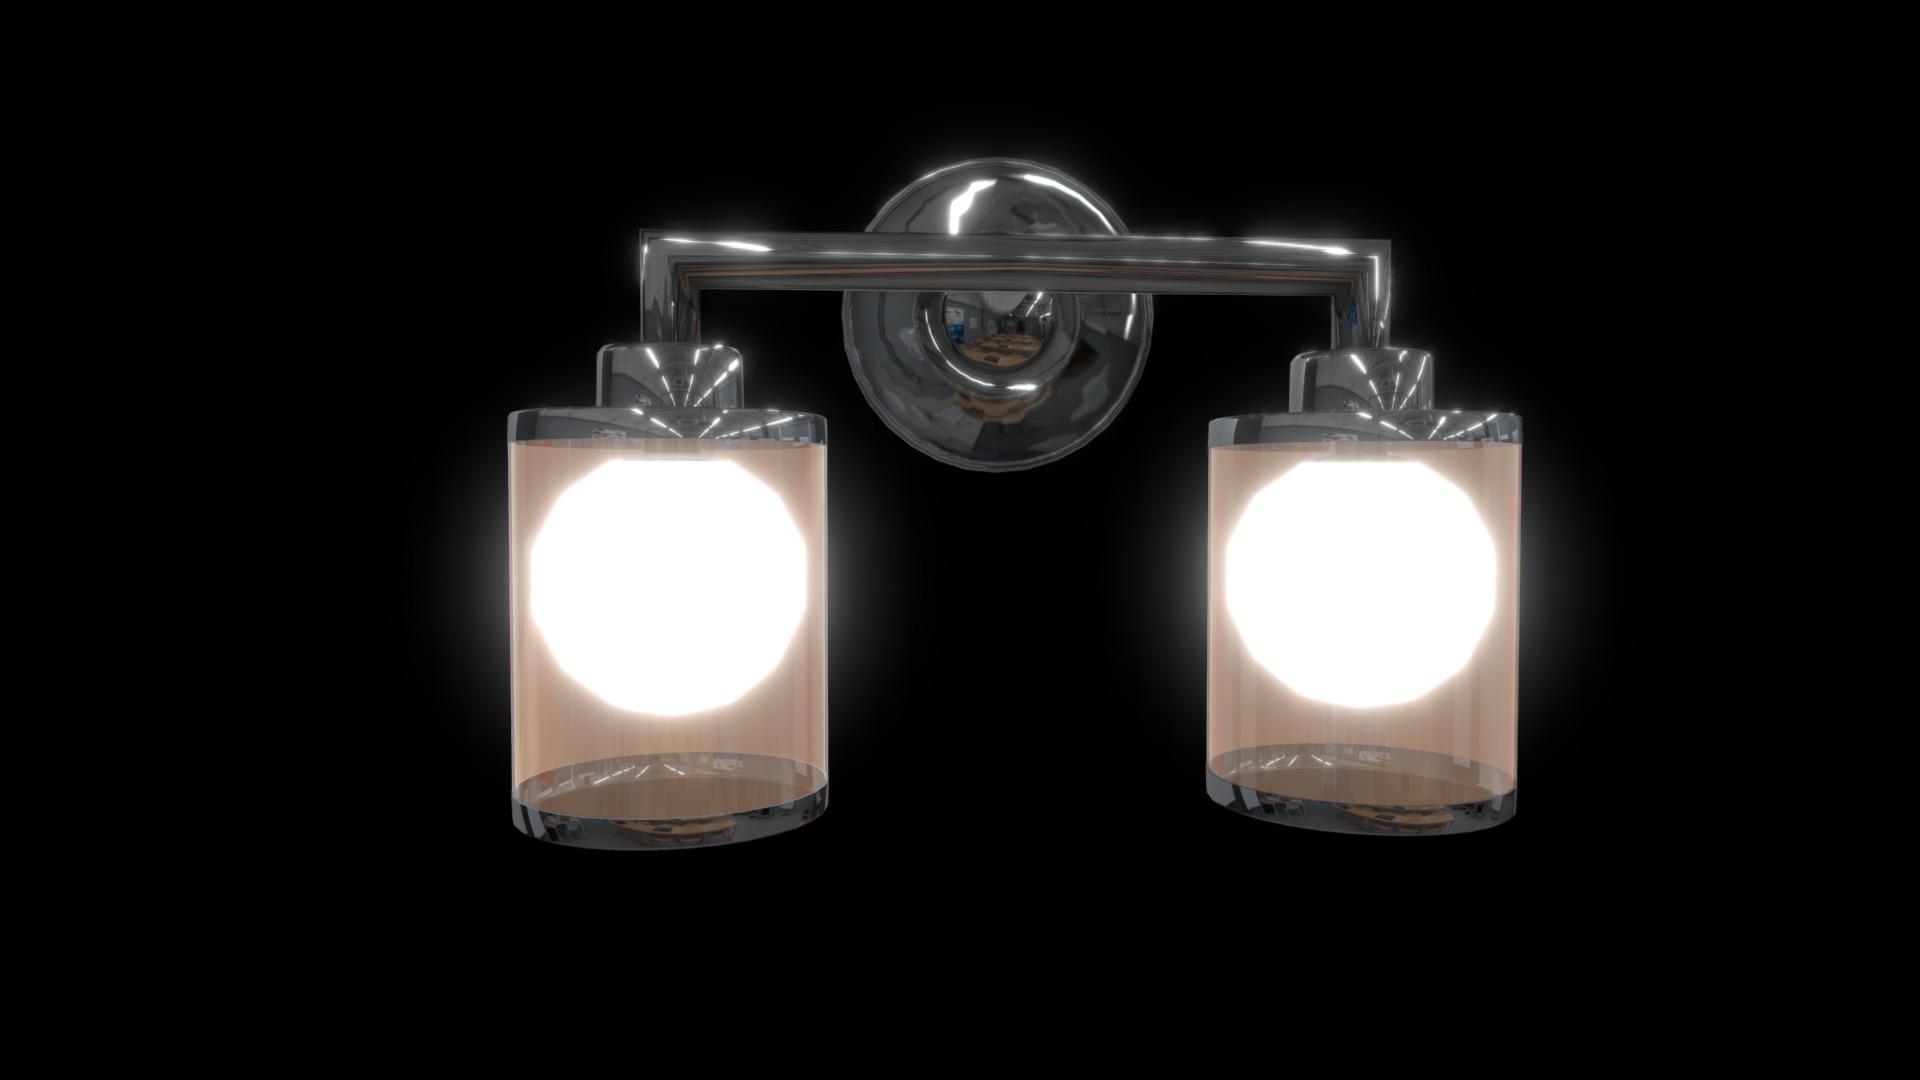 3D model HGPBR-33 - This is a 3D model of the HGPBR-33. The 3D model is about a few light bulbs.